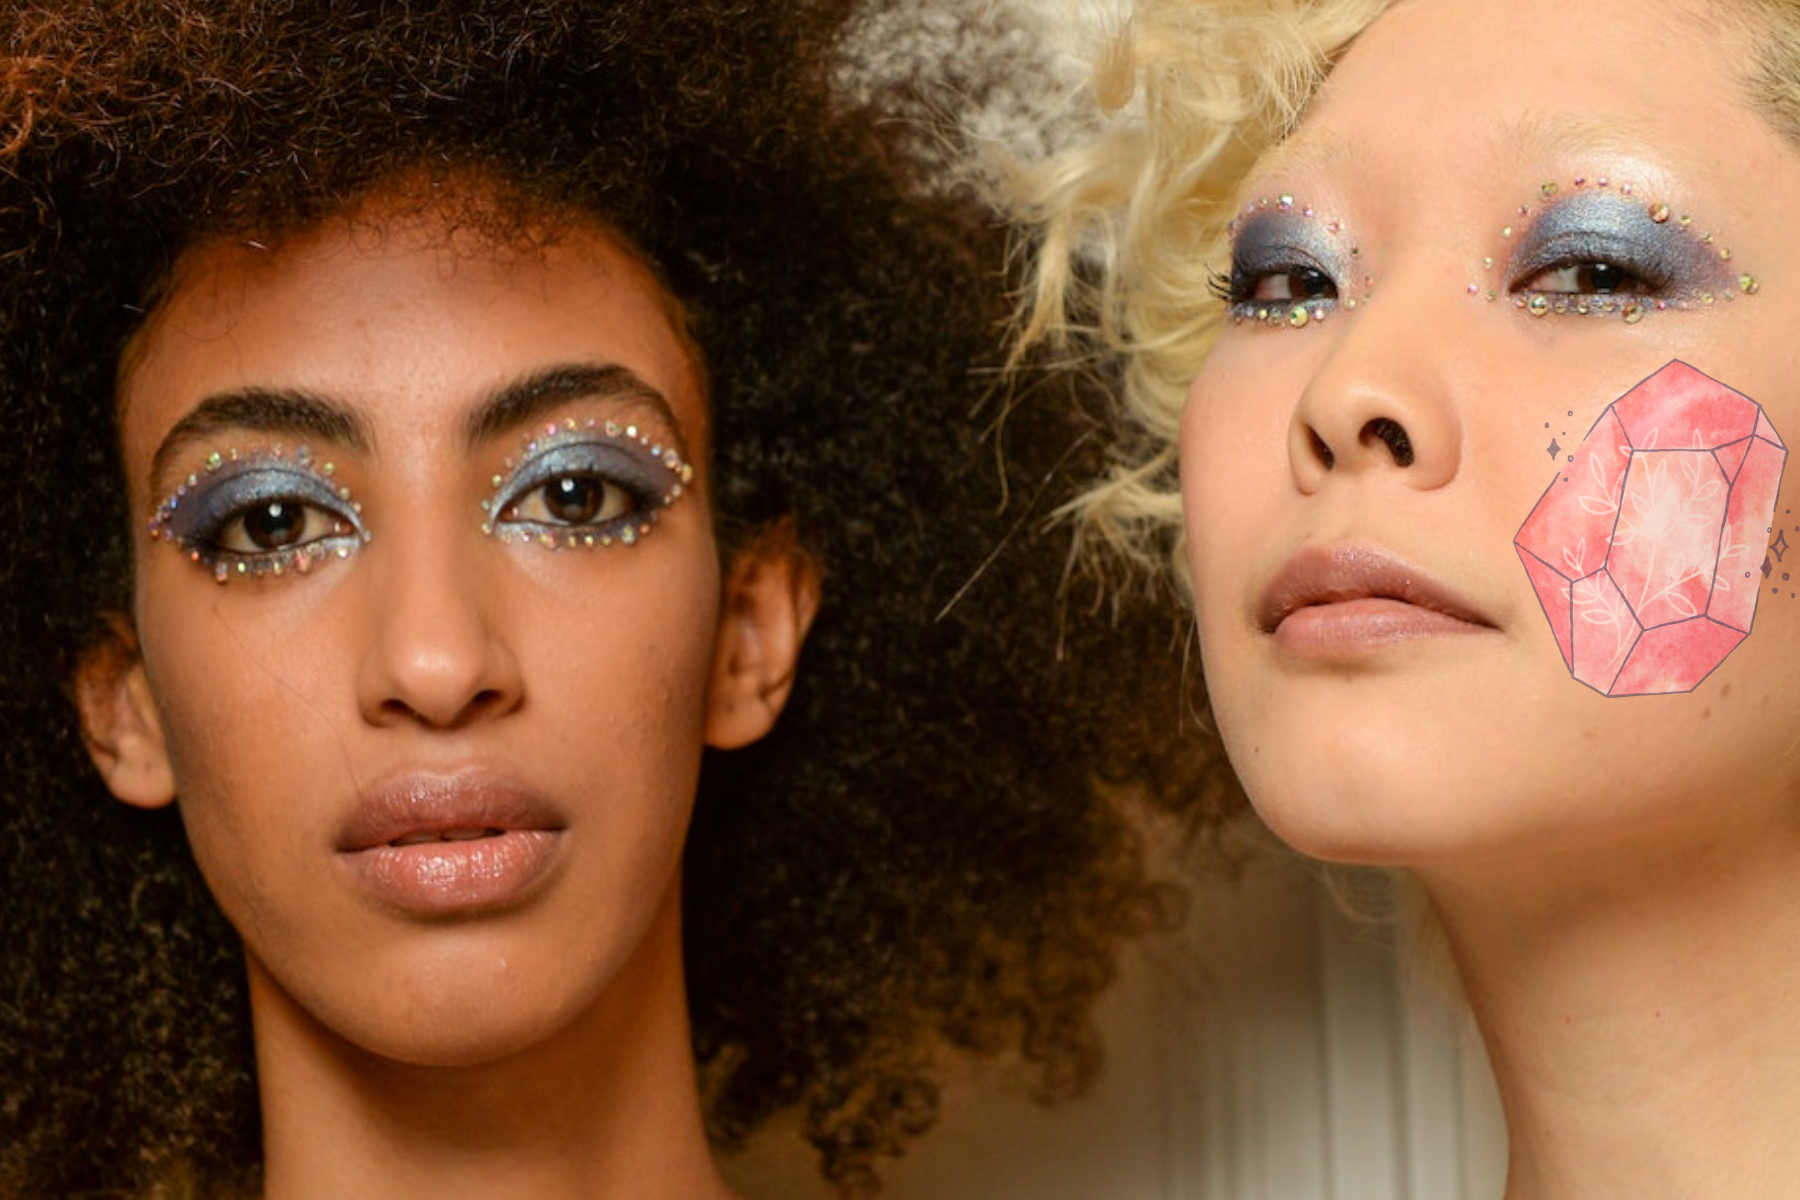 A black woman and an albino woman, both wearing gemstones on their faces